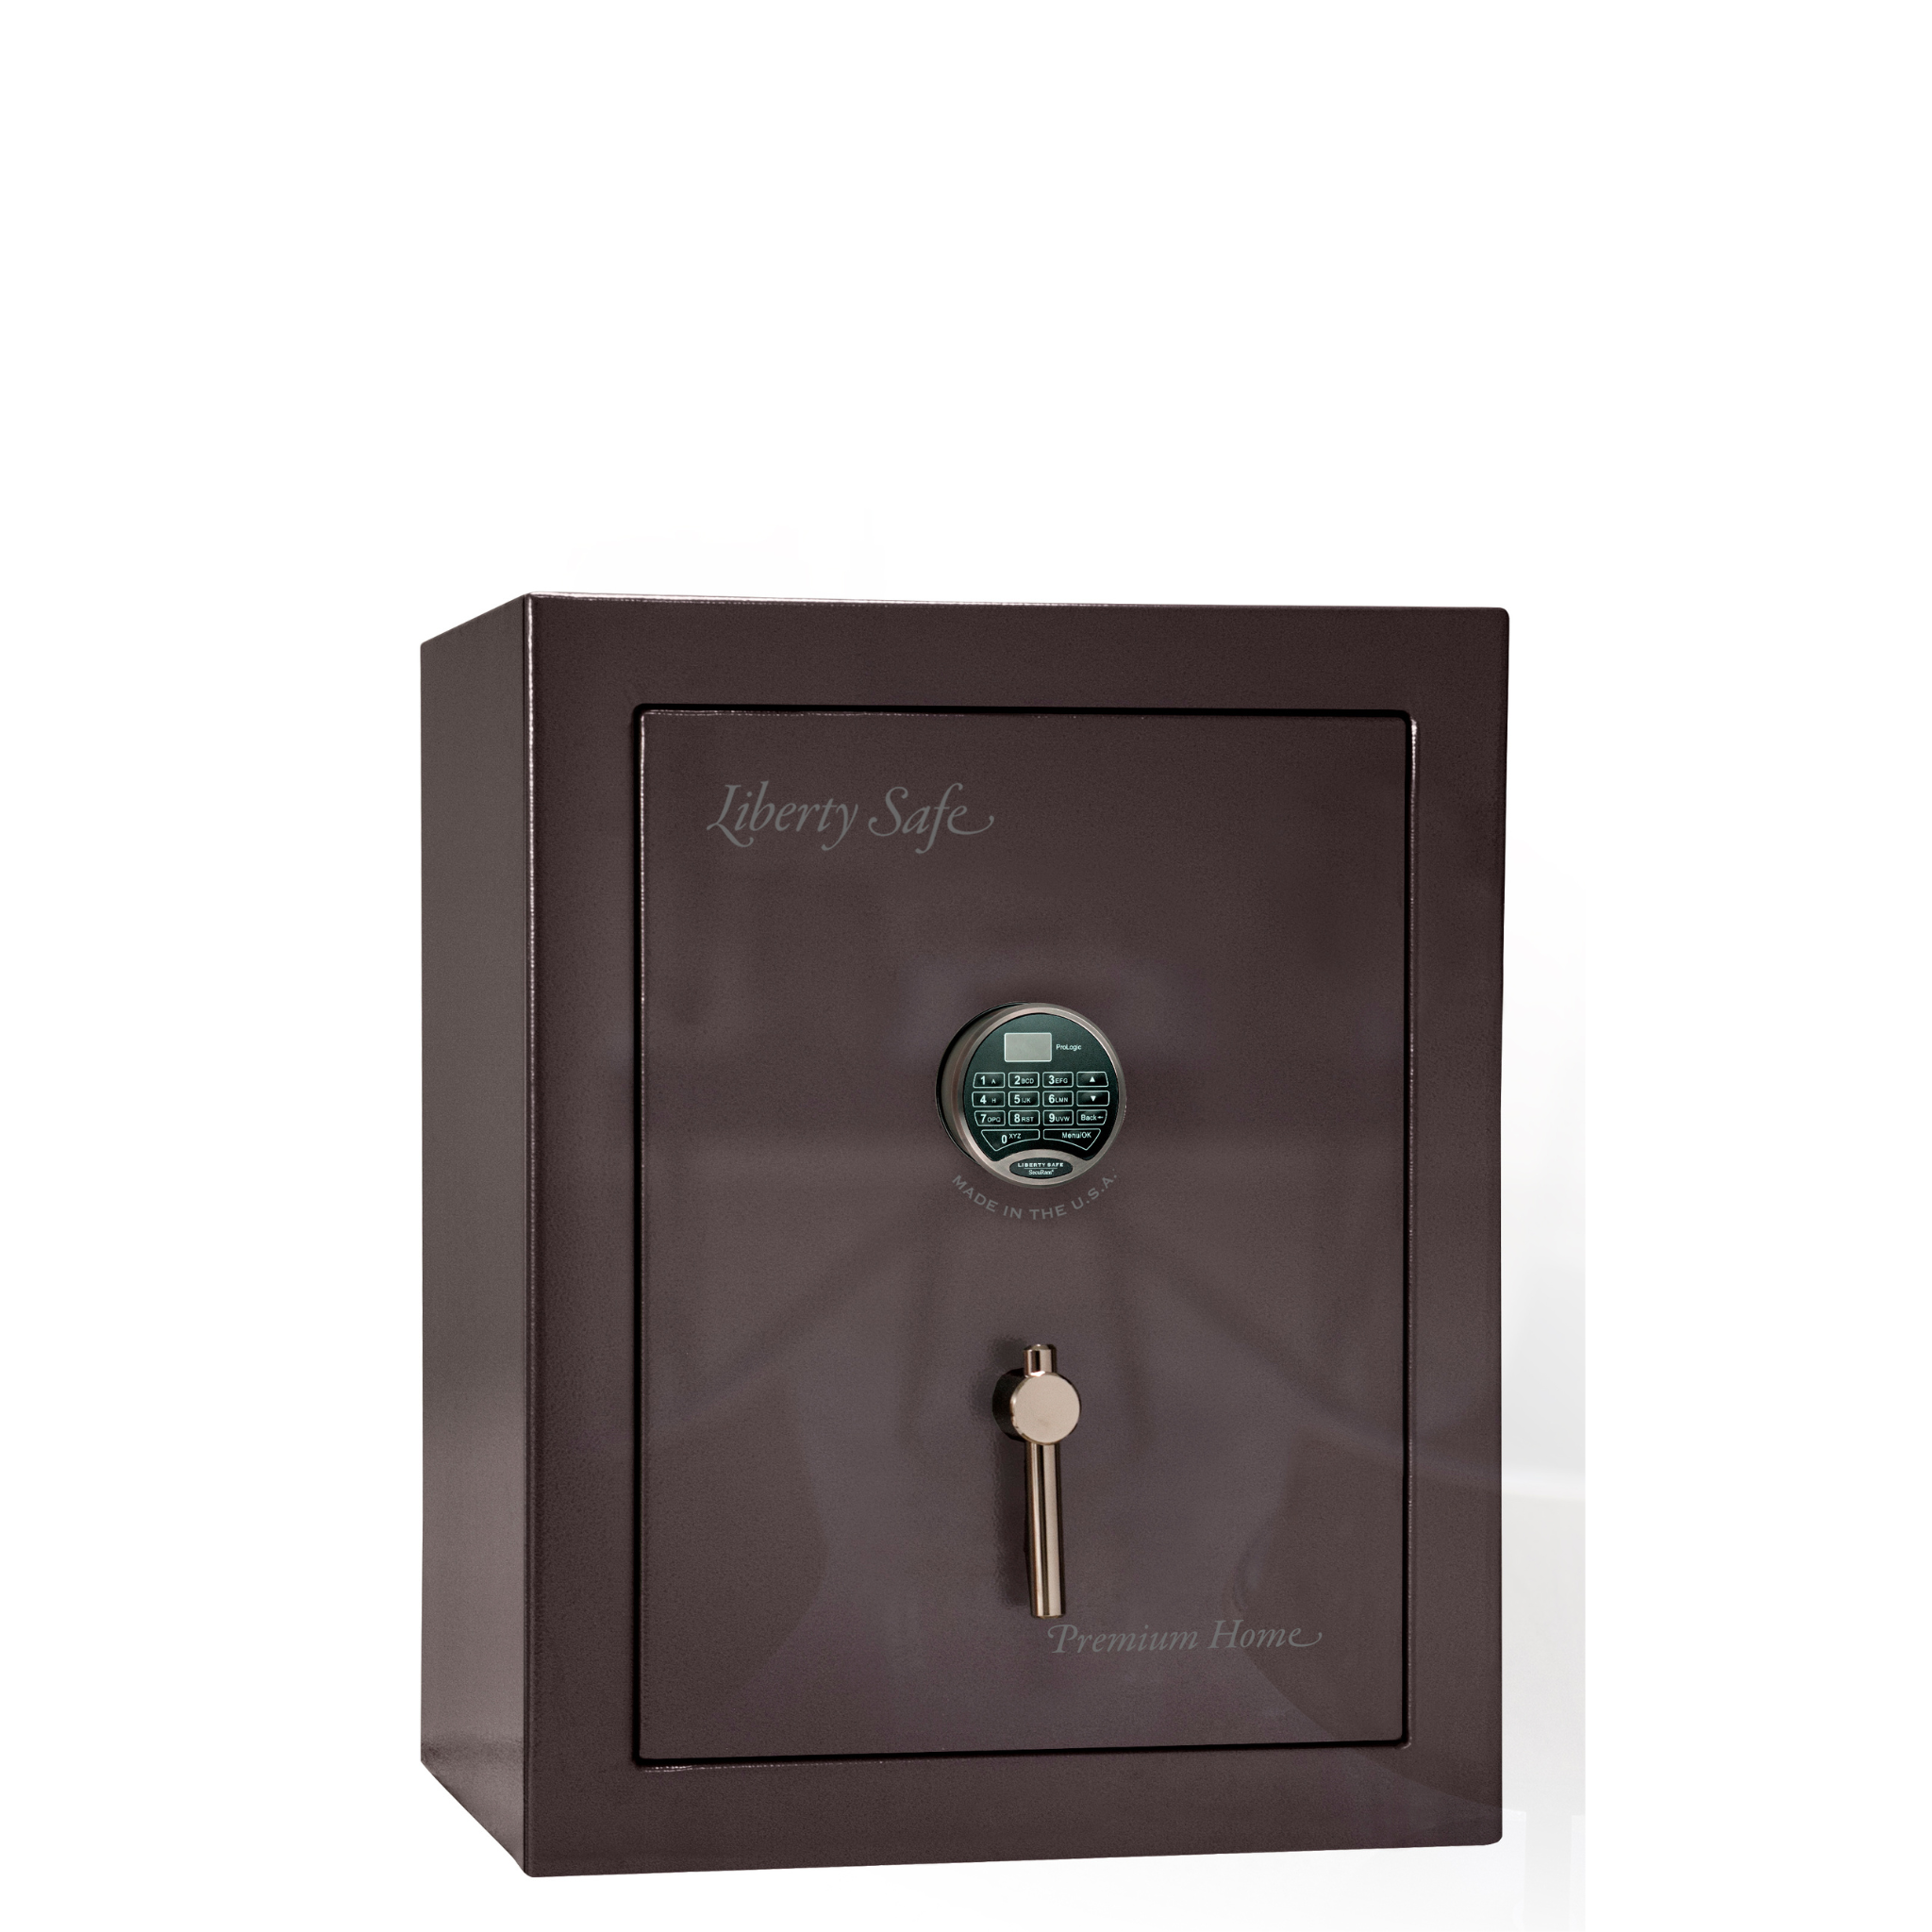 Premium Home Series | Level 7 Security | 2 Hour Fire Protection | 08 | Dimensions: 29.75"(H) x 24.5"(W) x 19"(D) | Black Cherry Gloss - Closed Door